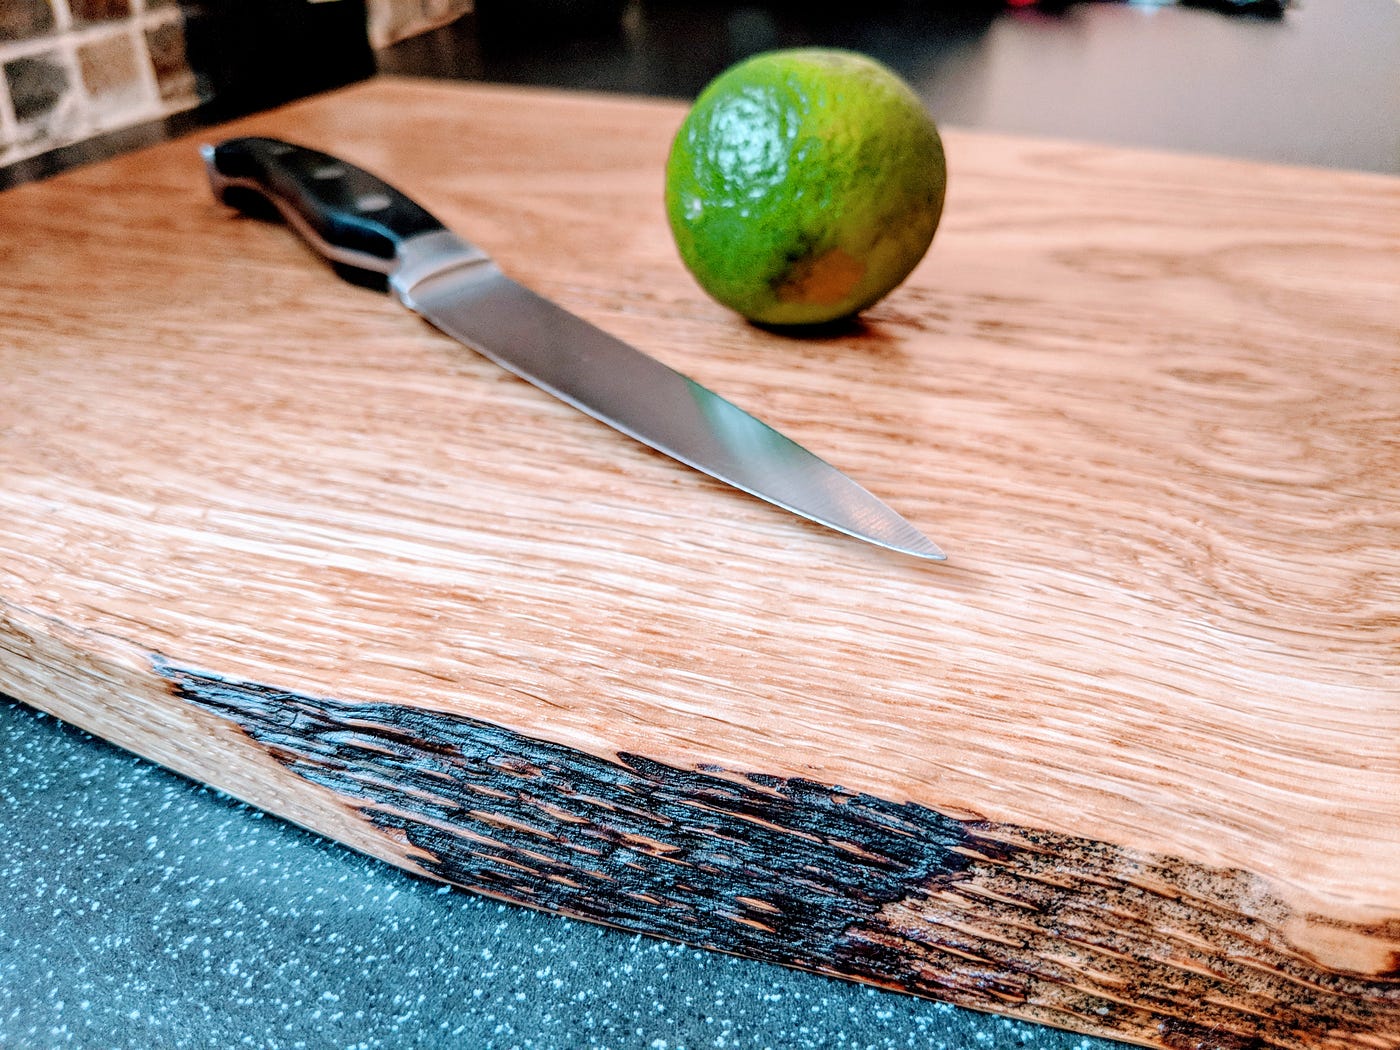 How to Store Cutting Boards - Top 8 Ways to Organize - Virginia